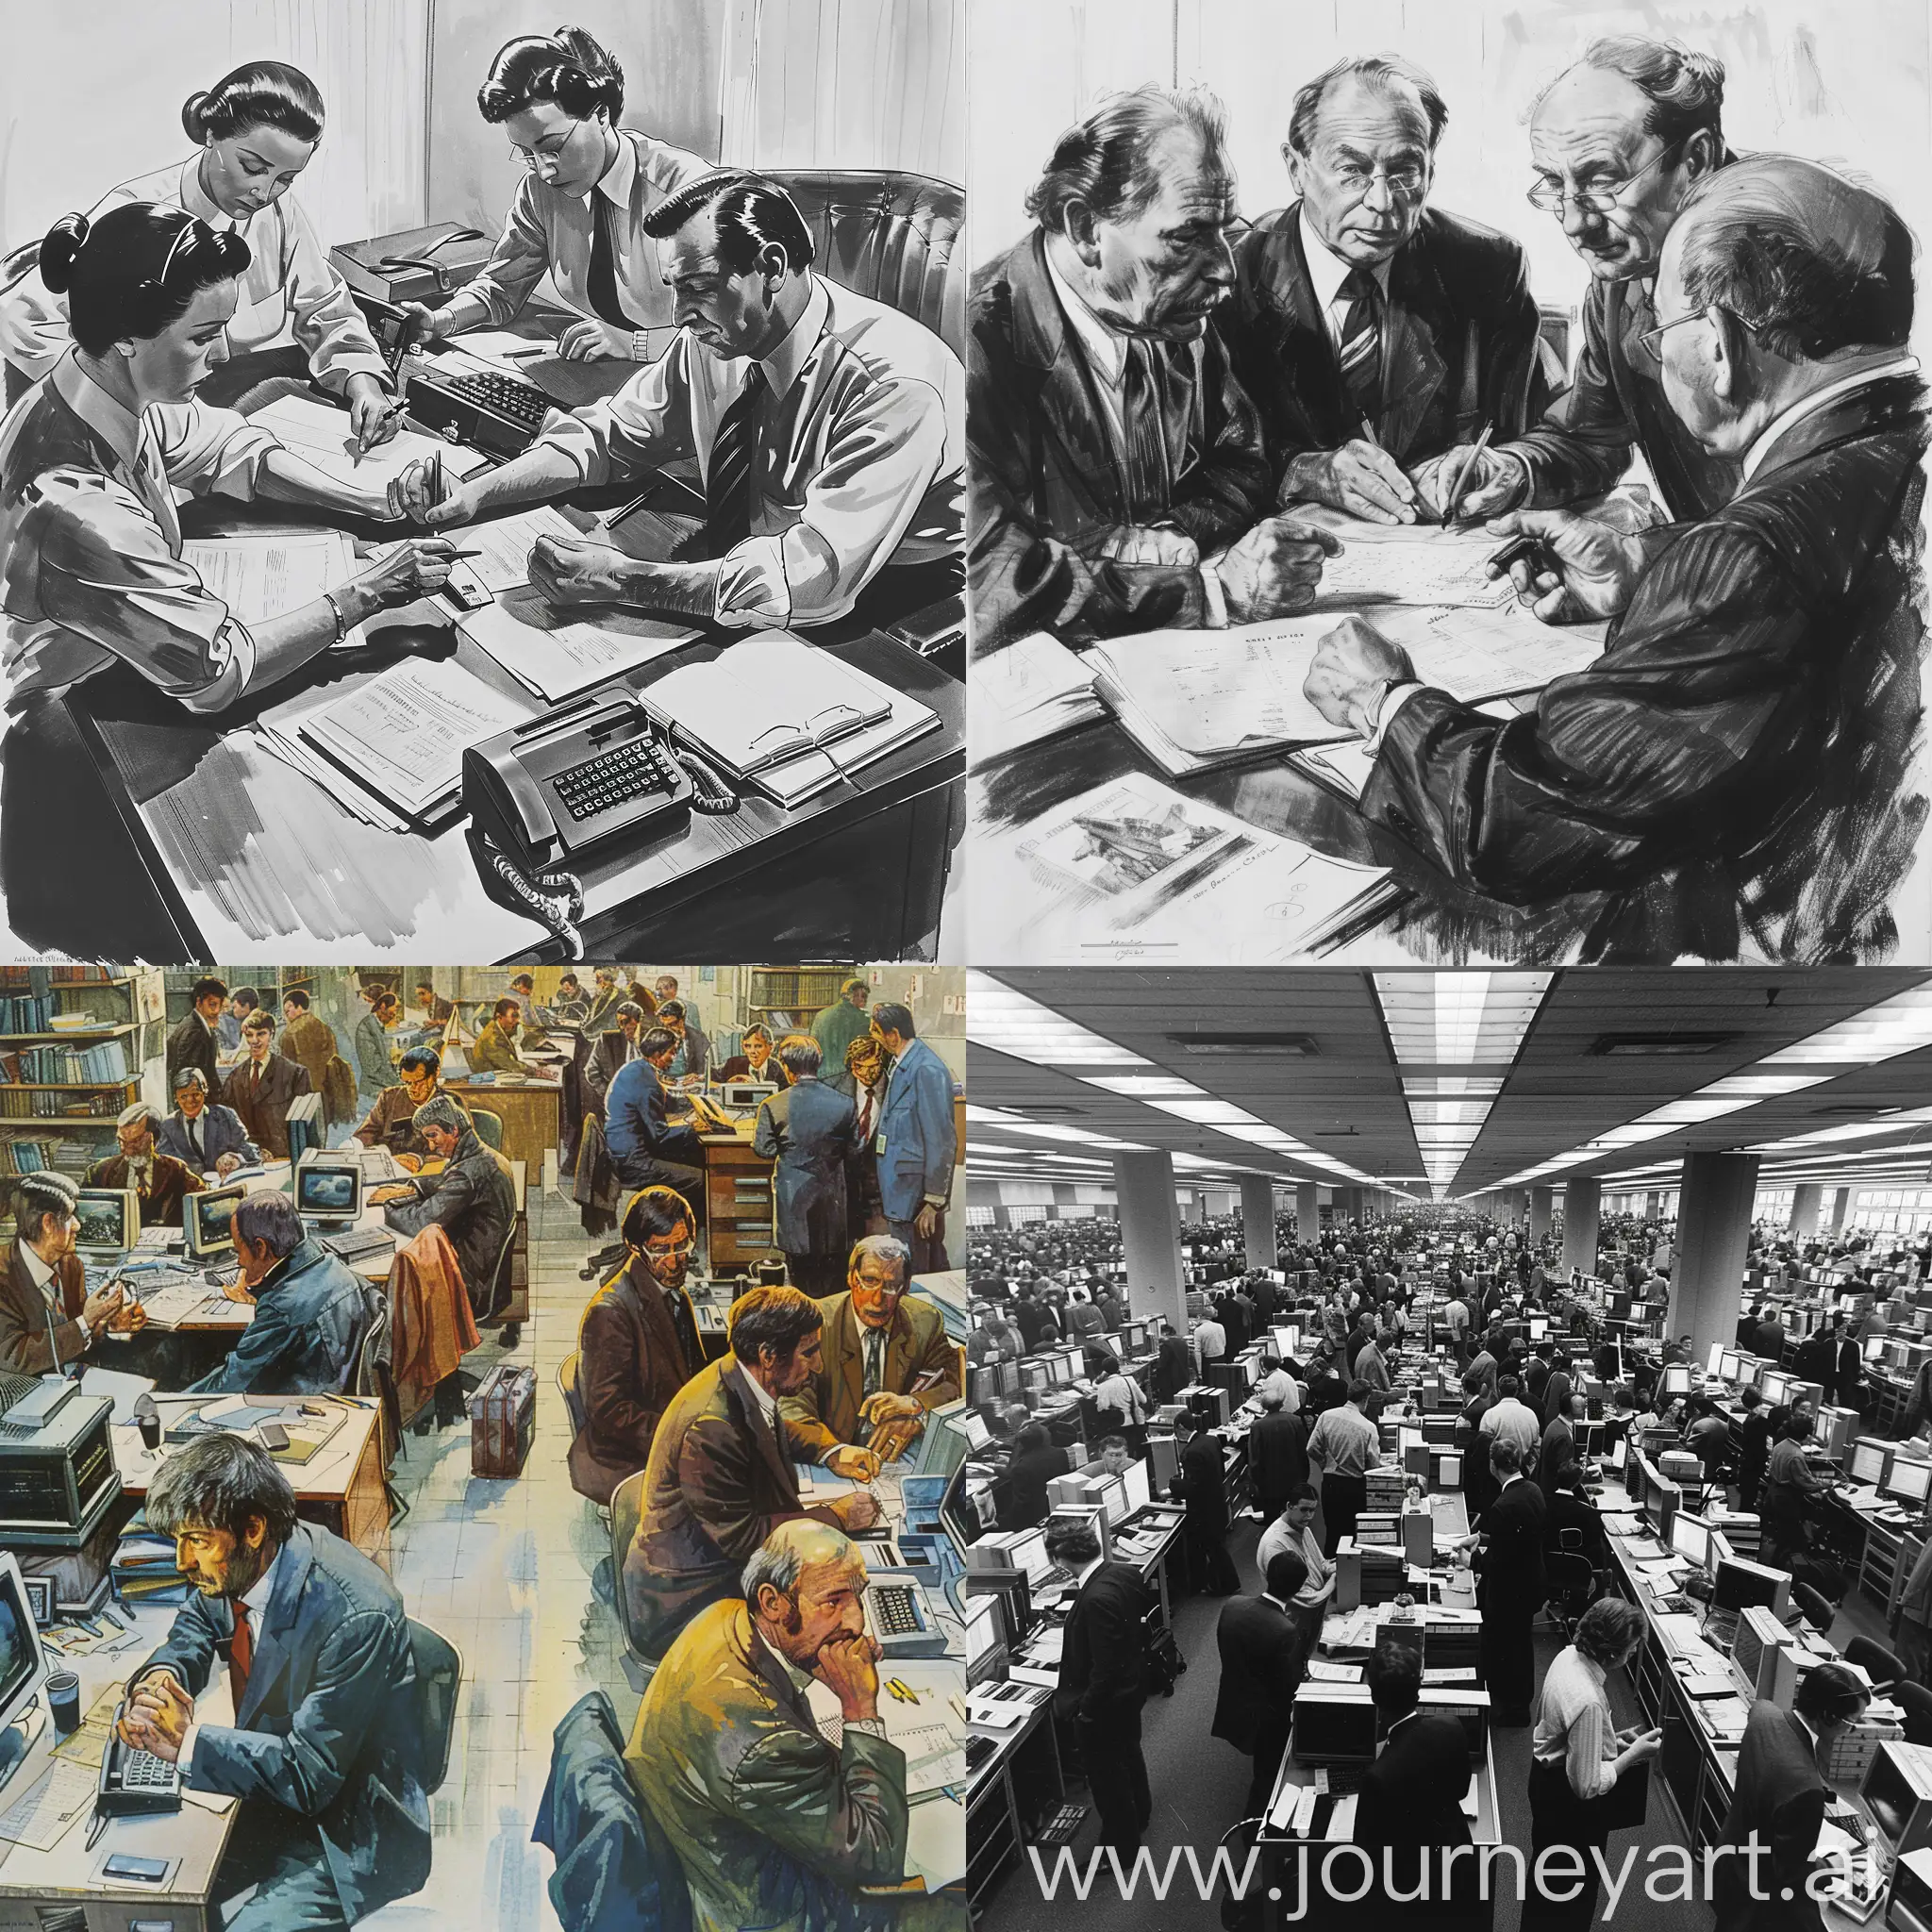 1980s-Workplace-Harmony-Traditional-Employment-Bonds-and-Collective-Security